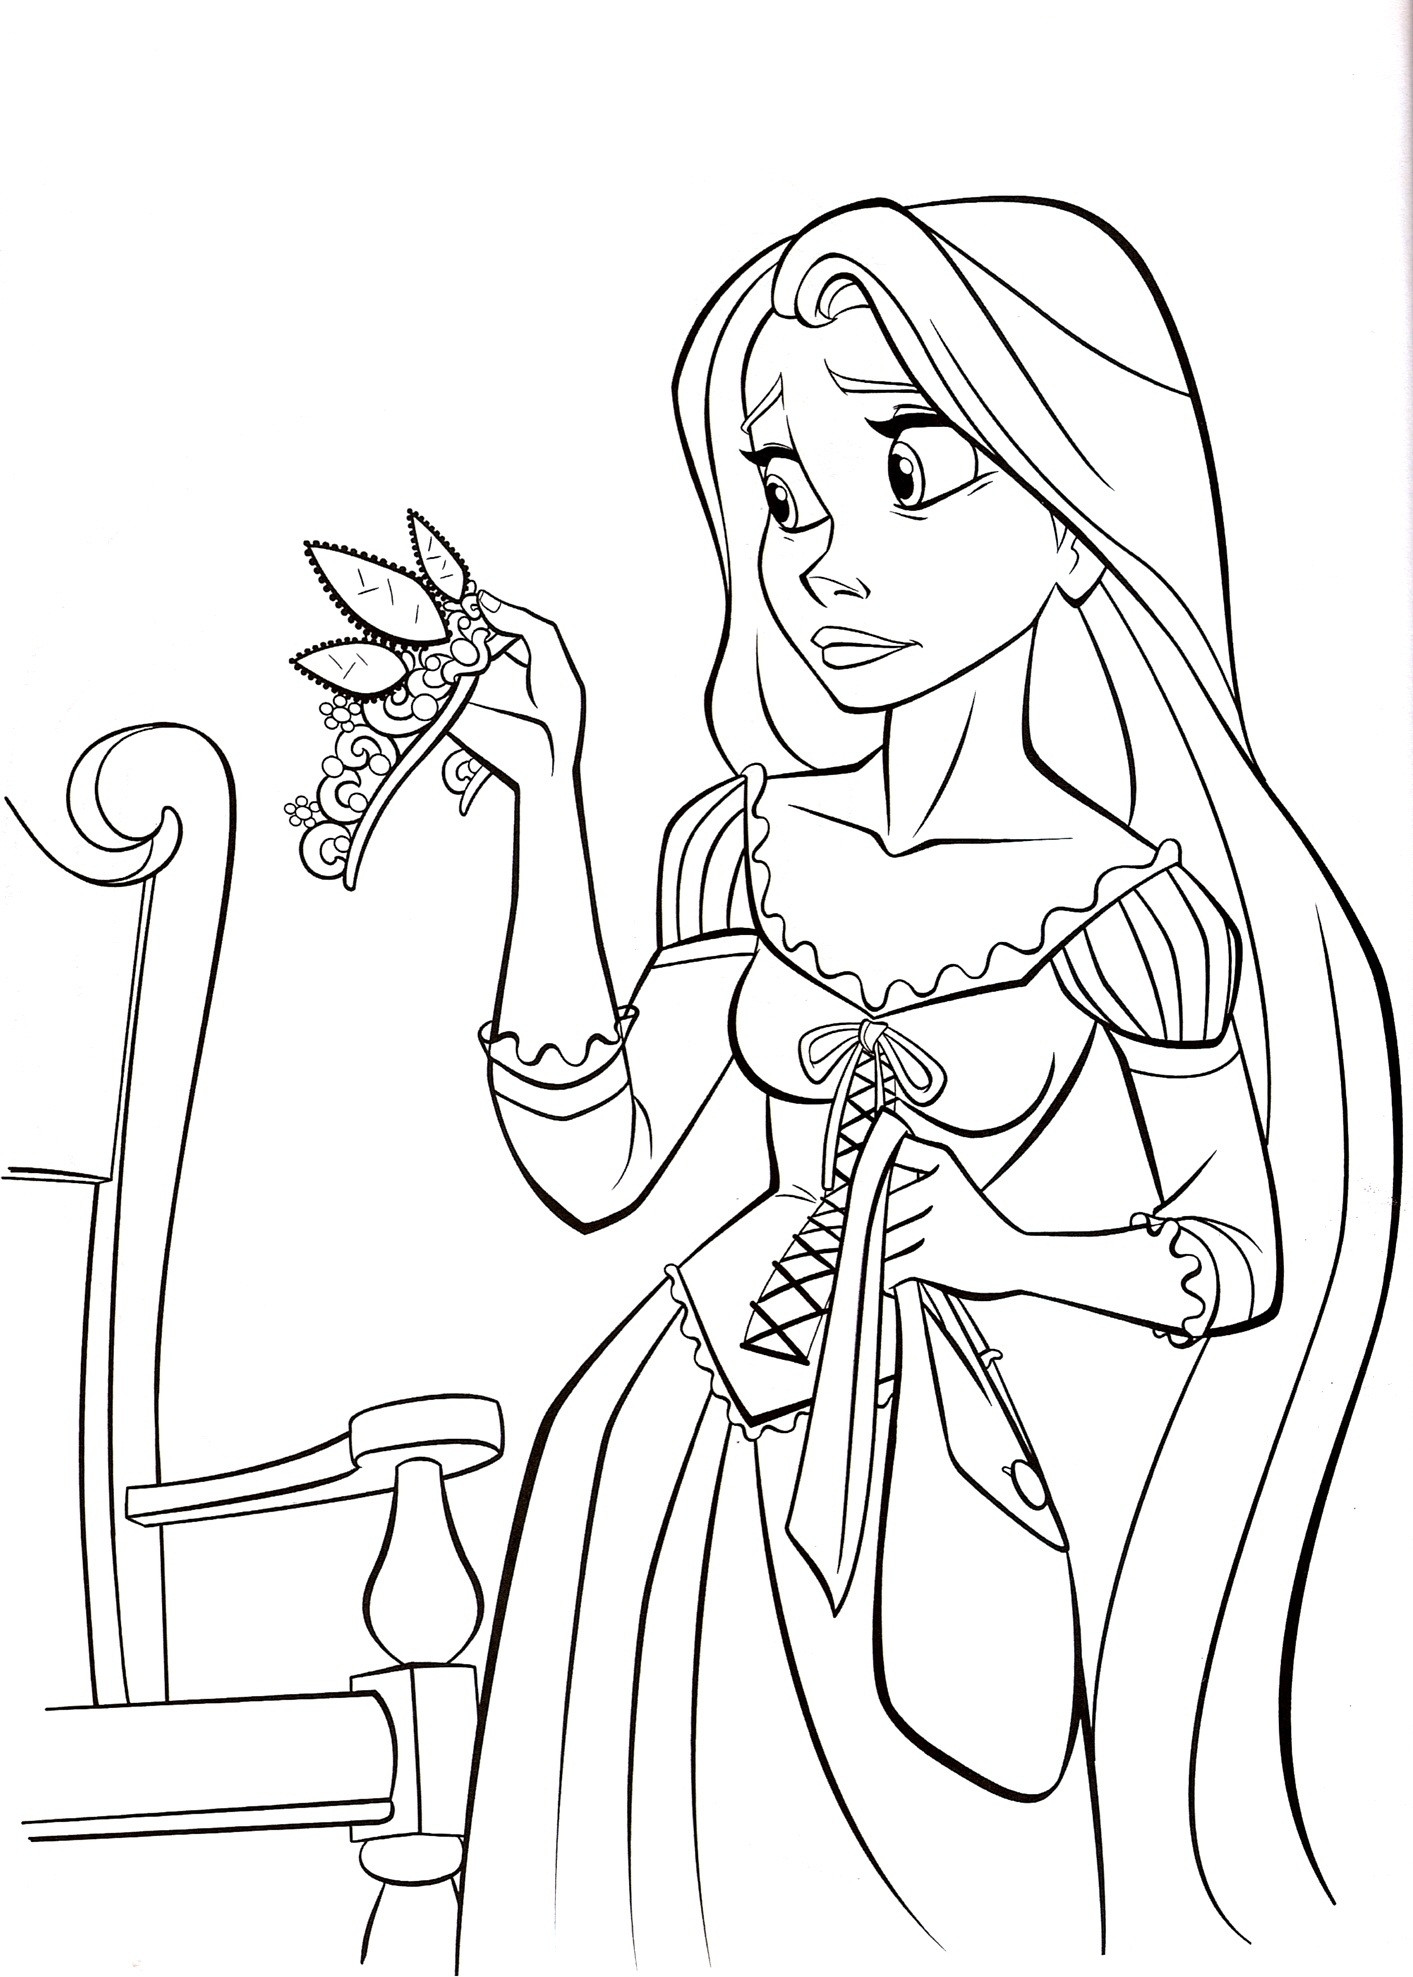 Kids Coloring Pages Disney
 Free Printable Tangled Coloring Pages For Kids